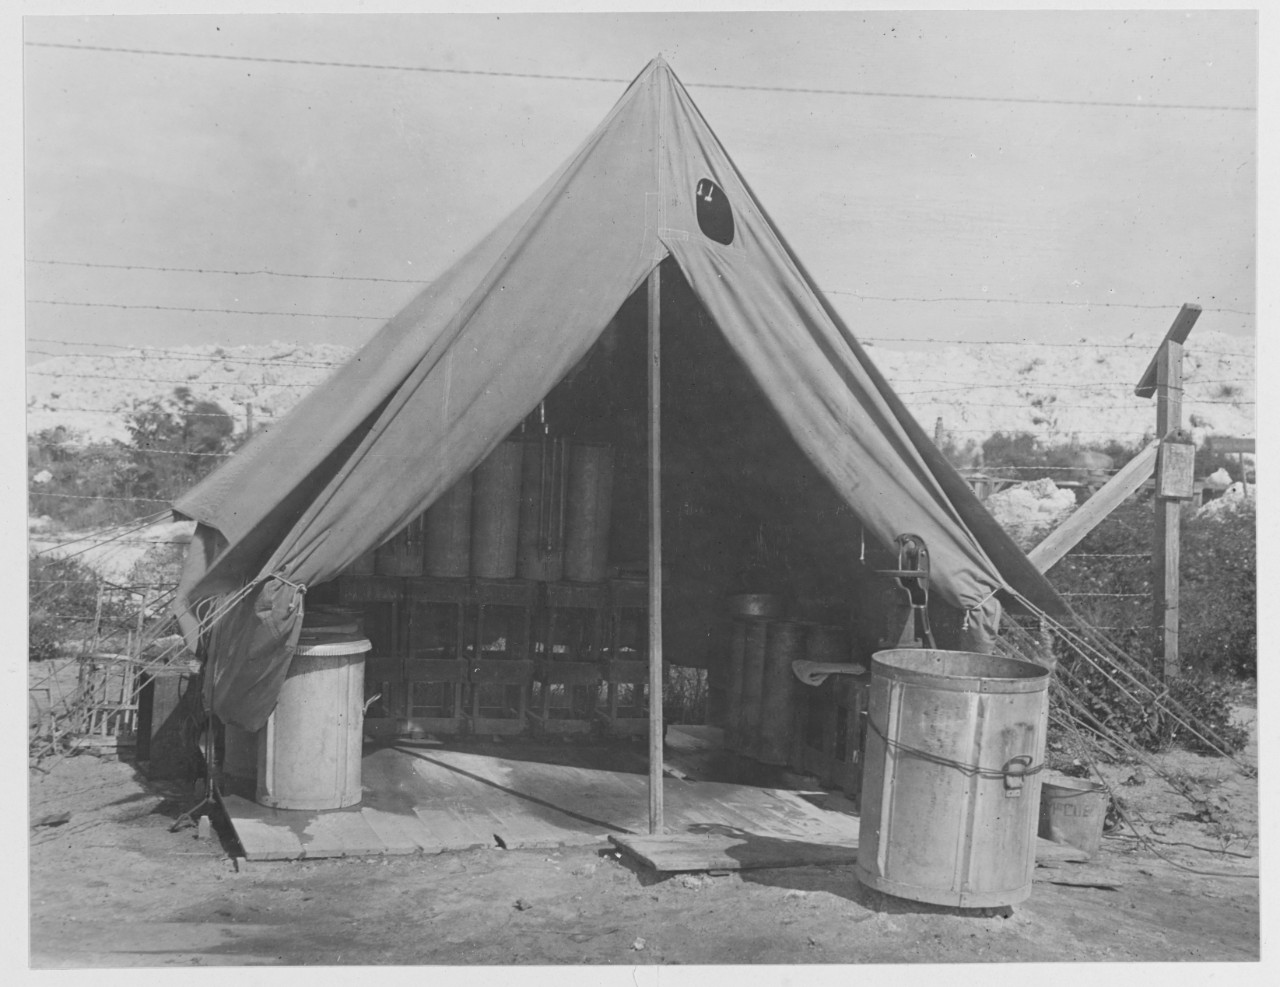 Drinking water for camp, U.S. Marine Flying Field, Miami, Florida.